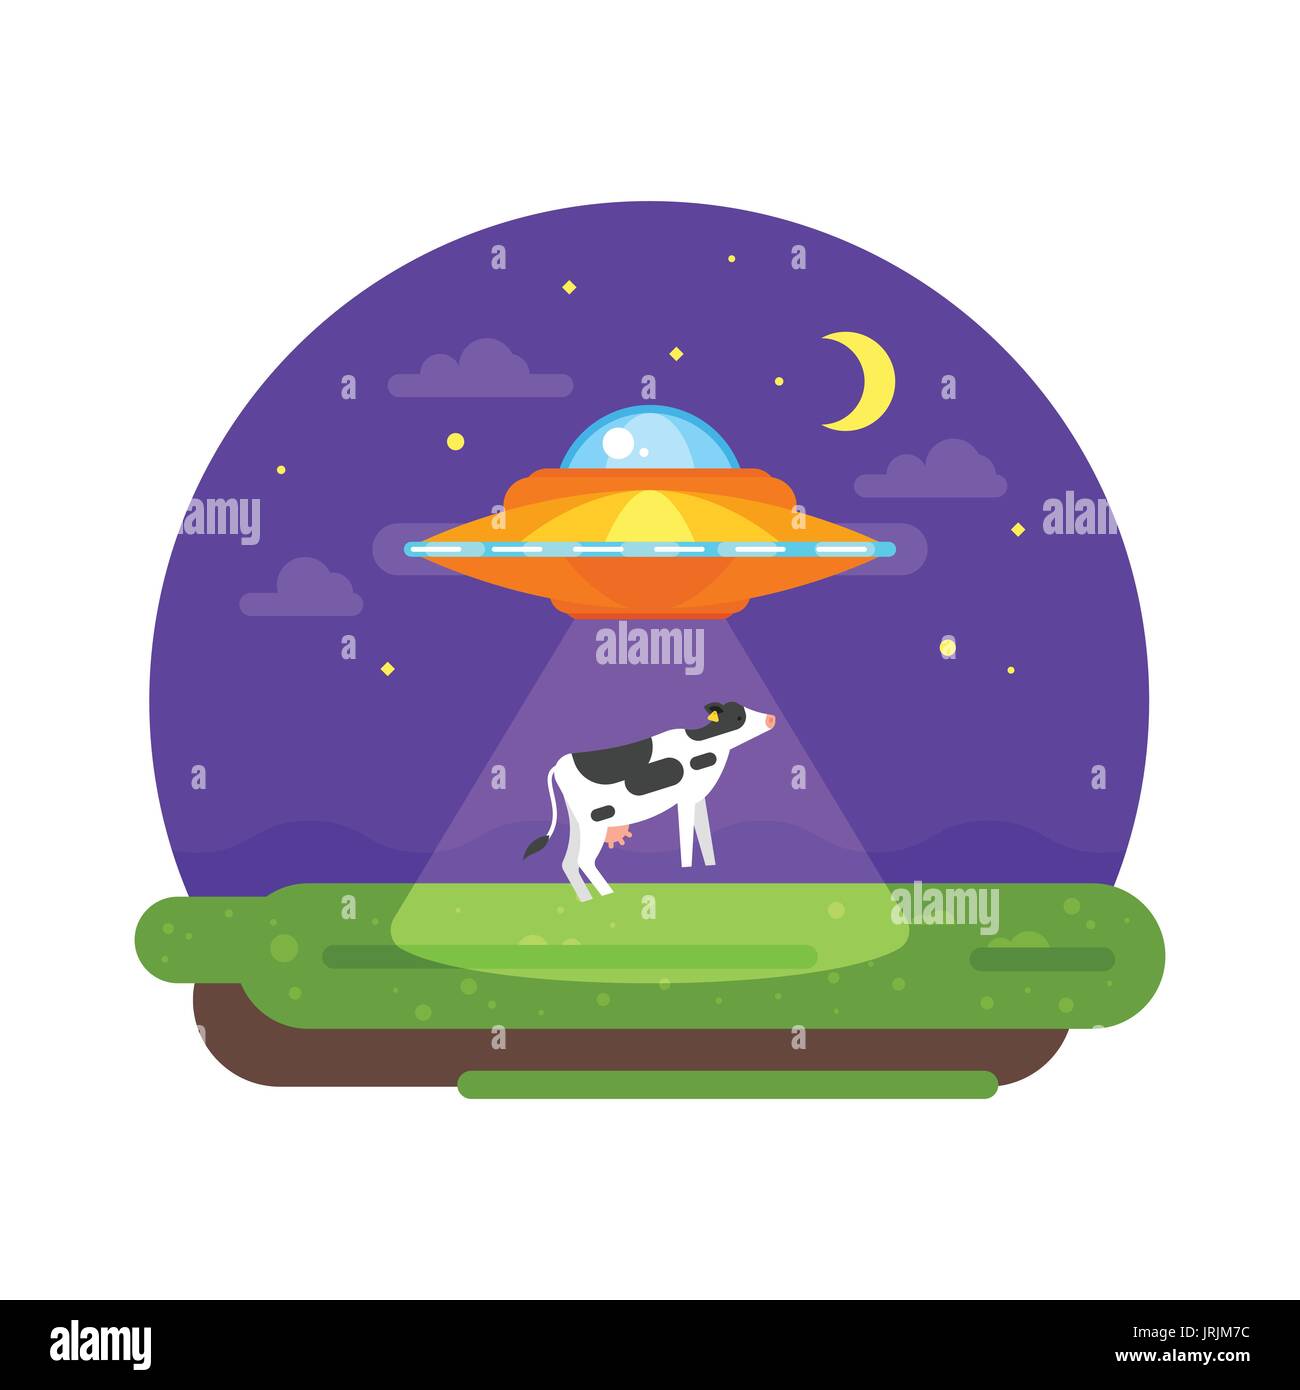 Vector flat style illustration of alien ship truing to abduct a cow at night. Isolated on white background. Stock Vector